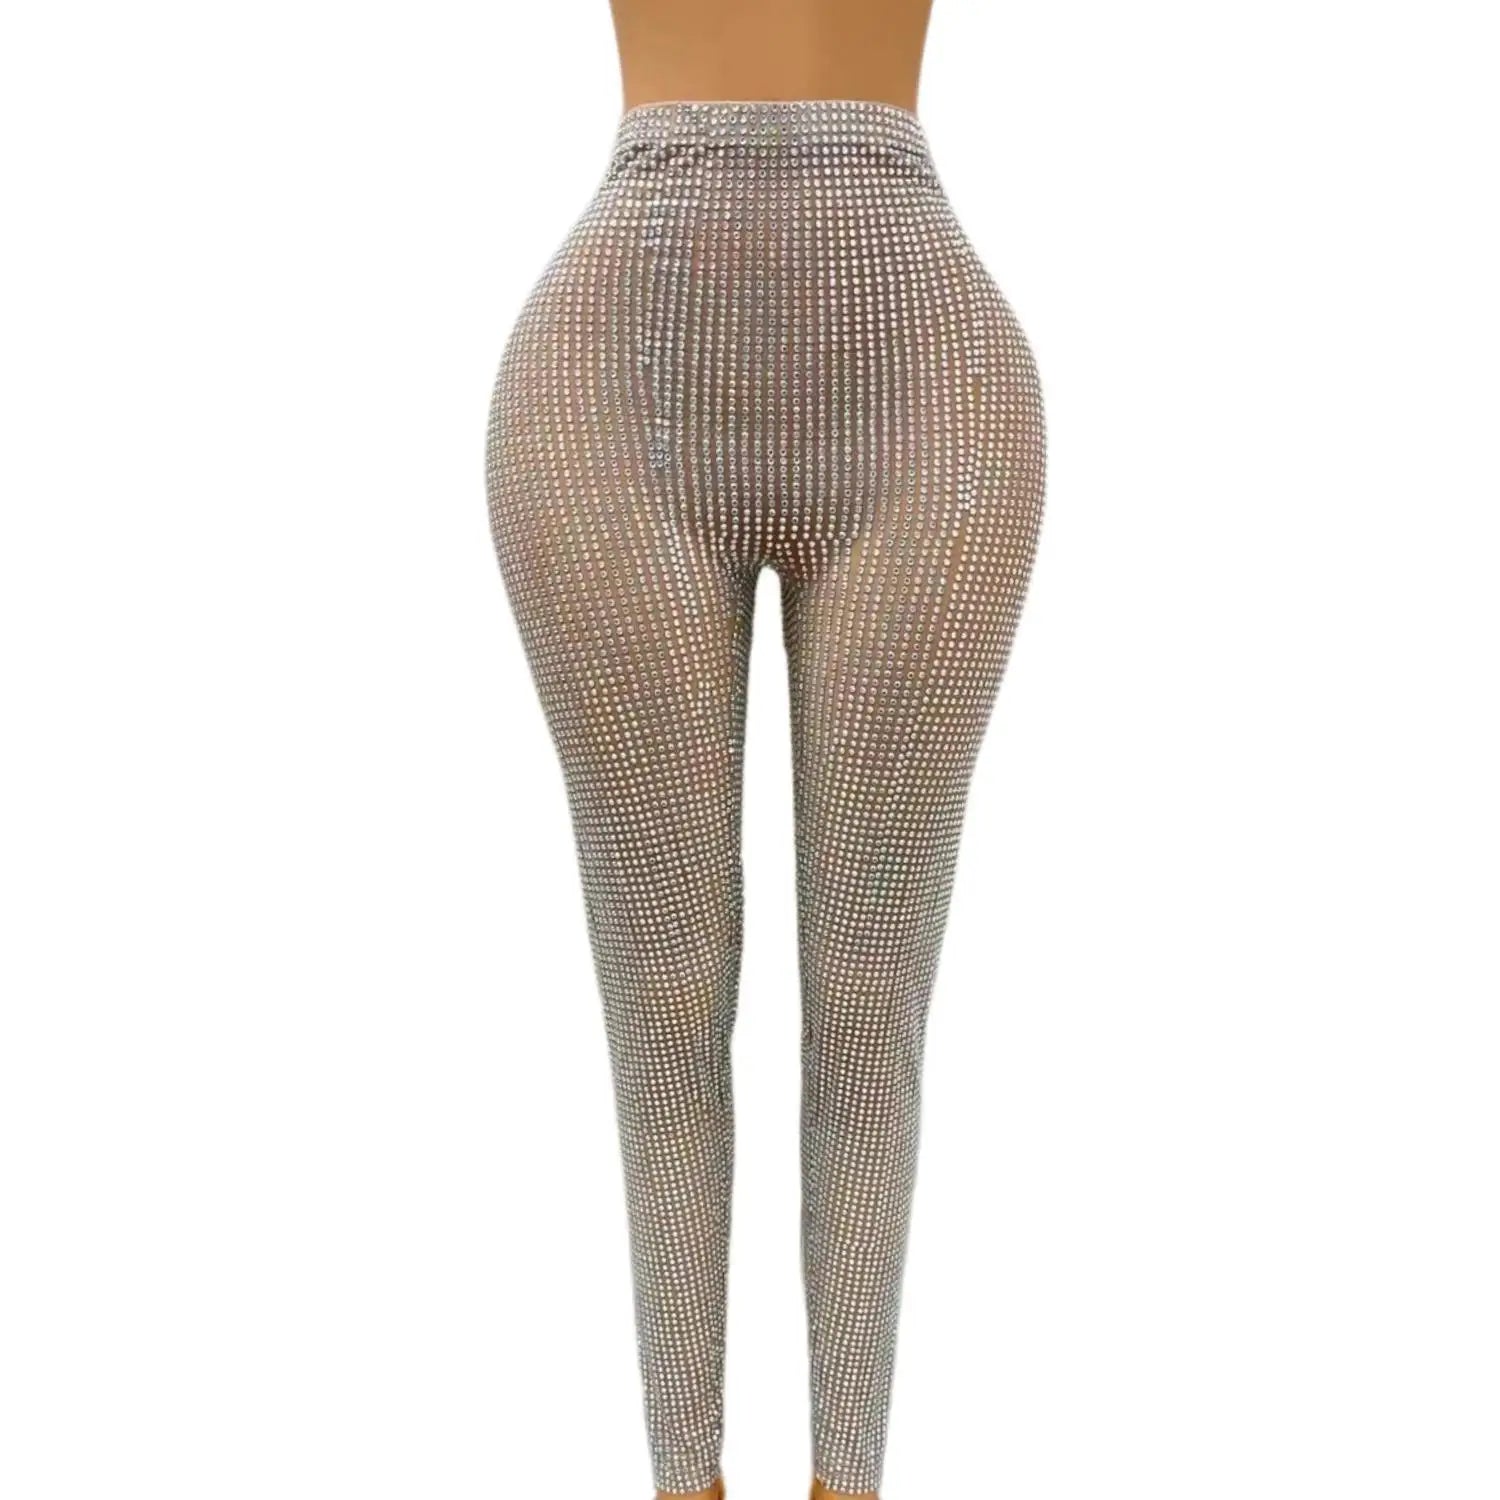 Sparkly Full Crystals Pants Women Club Prom Luxury Leggings Outfit Party Celebrate Glisten Sexy Dance Show Costume